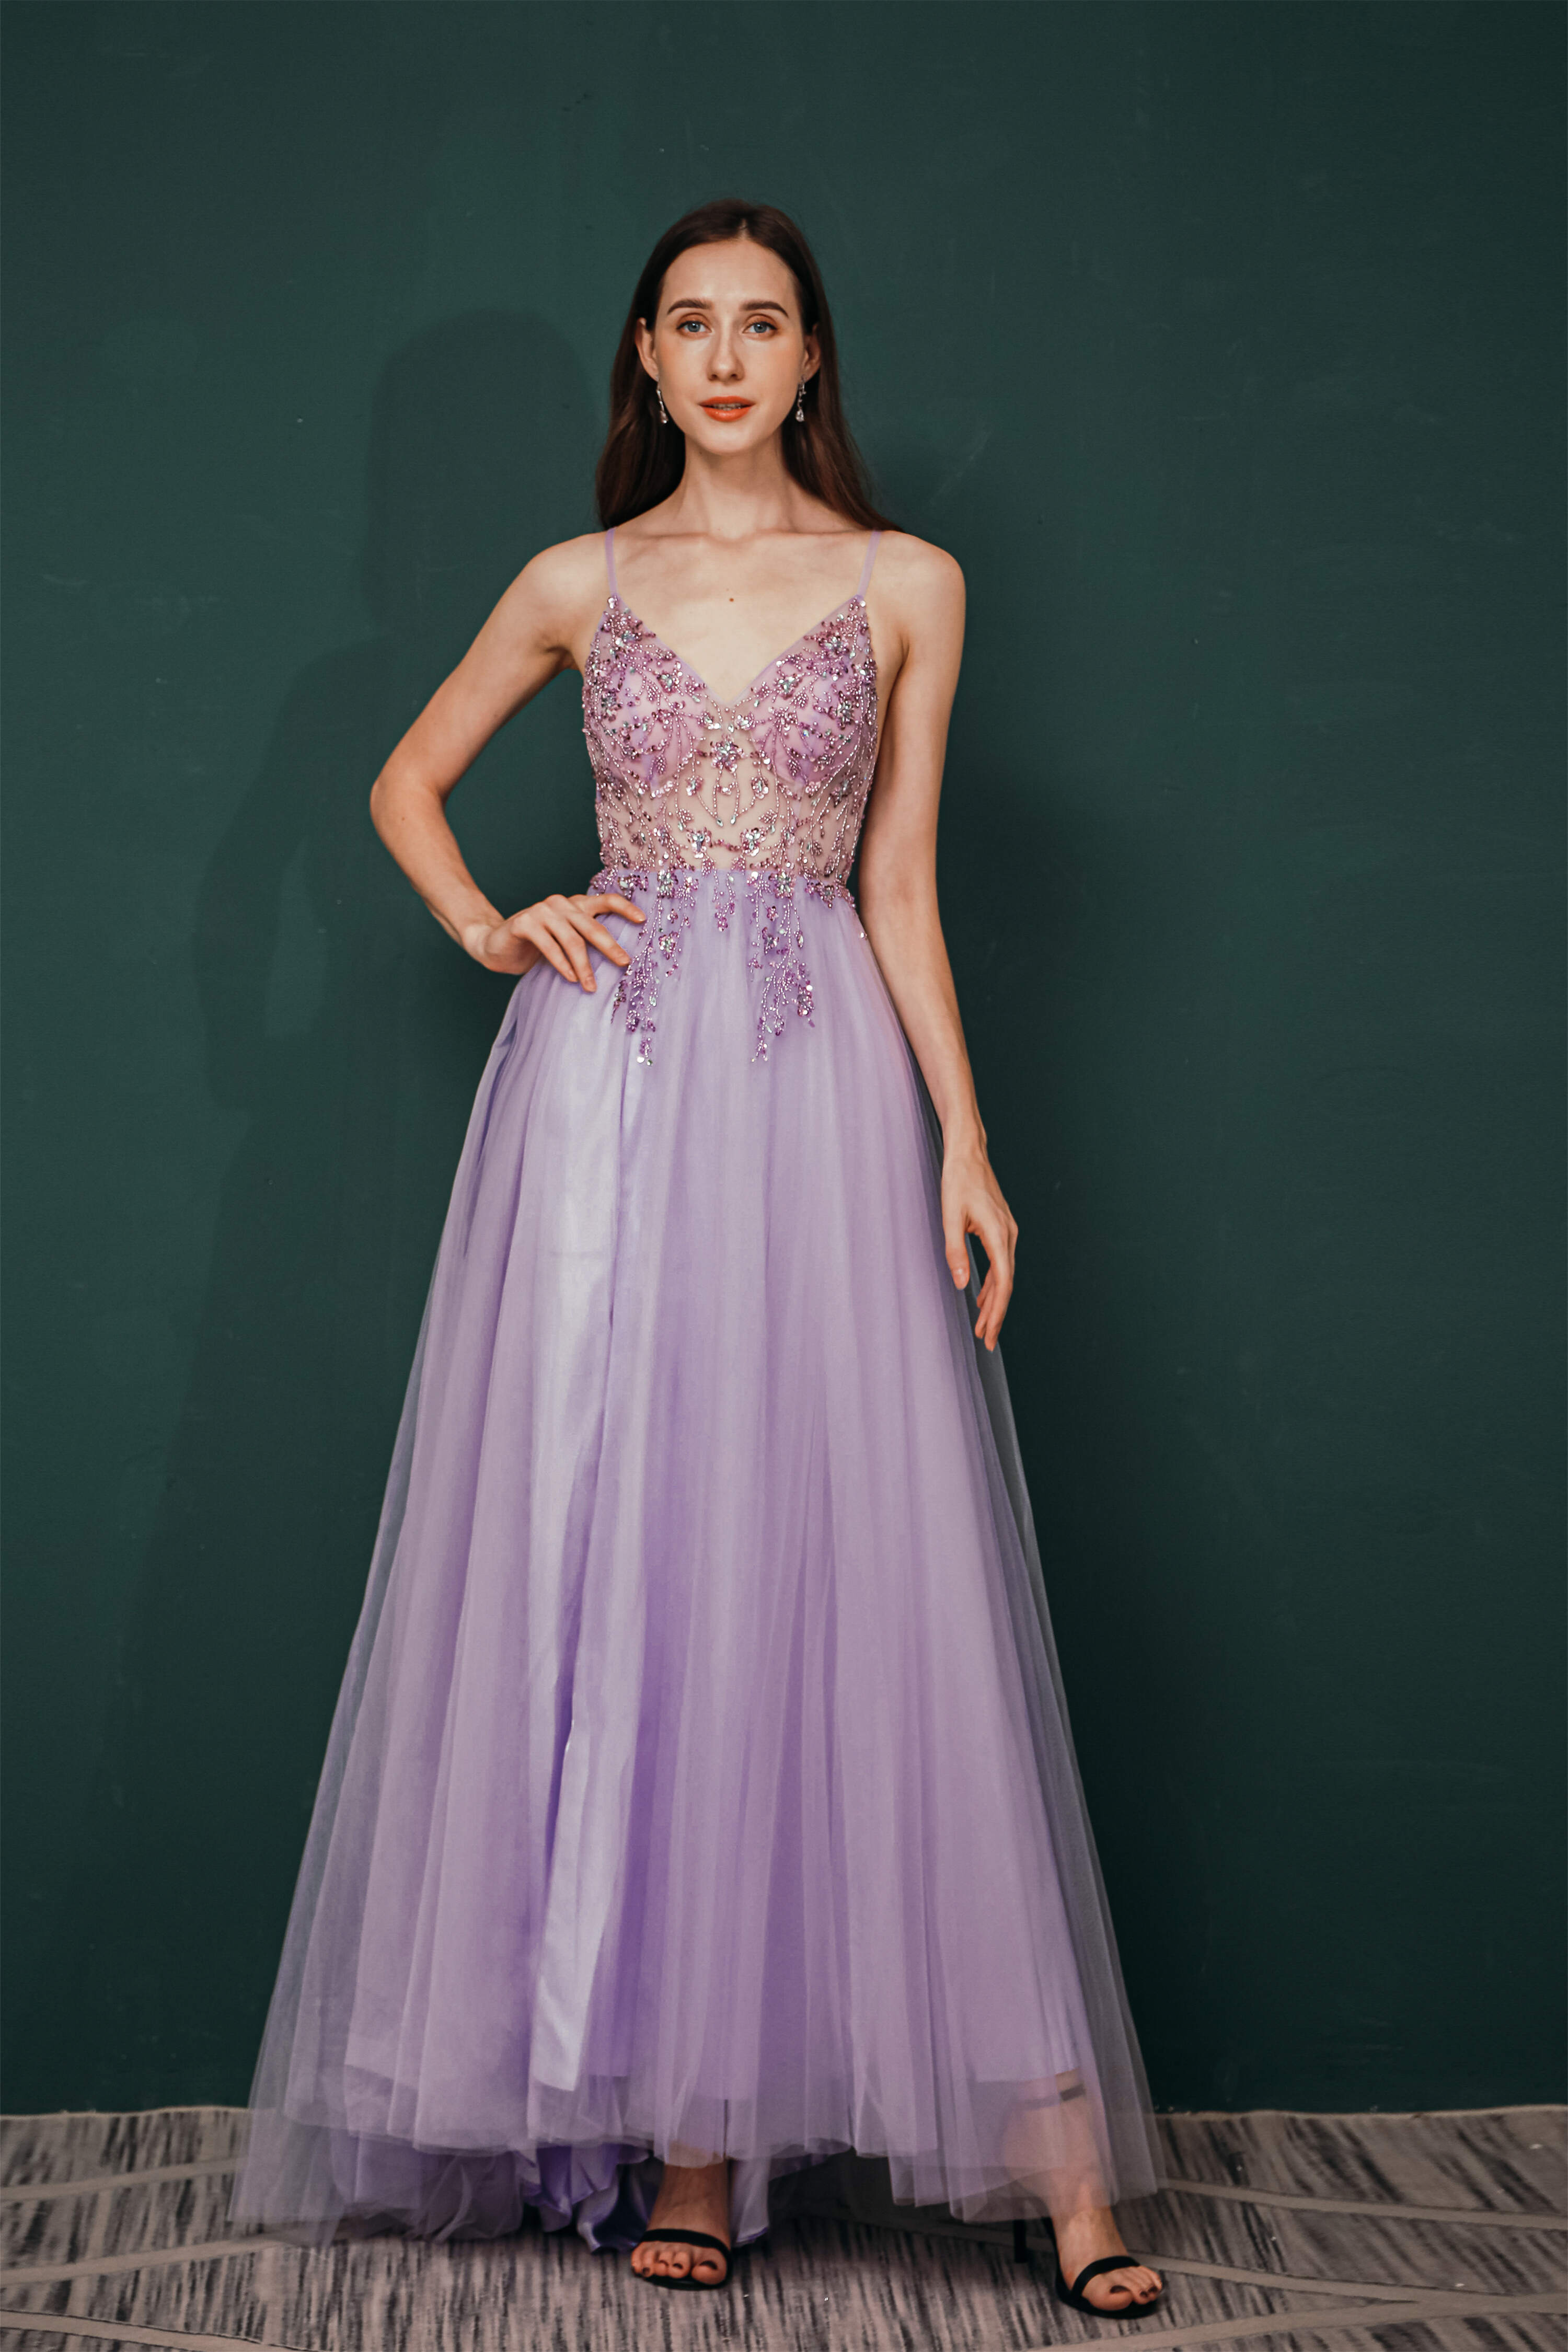 Stunning Front Split Spaghetti Straps Long A Line Beaded Corset Prom Dresses outfit, Party Dress Spring